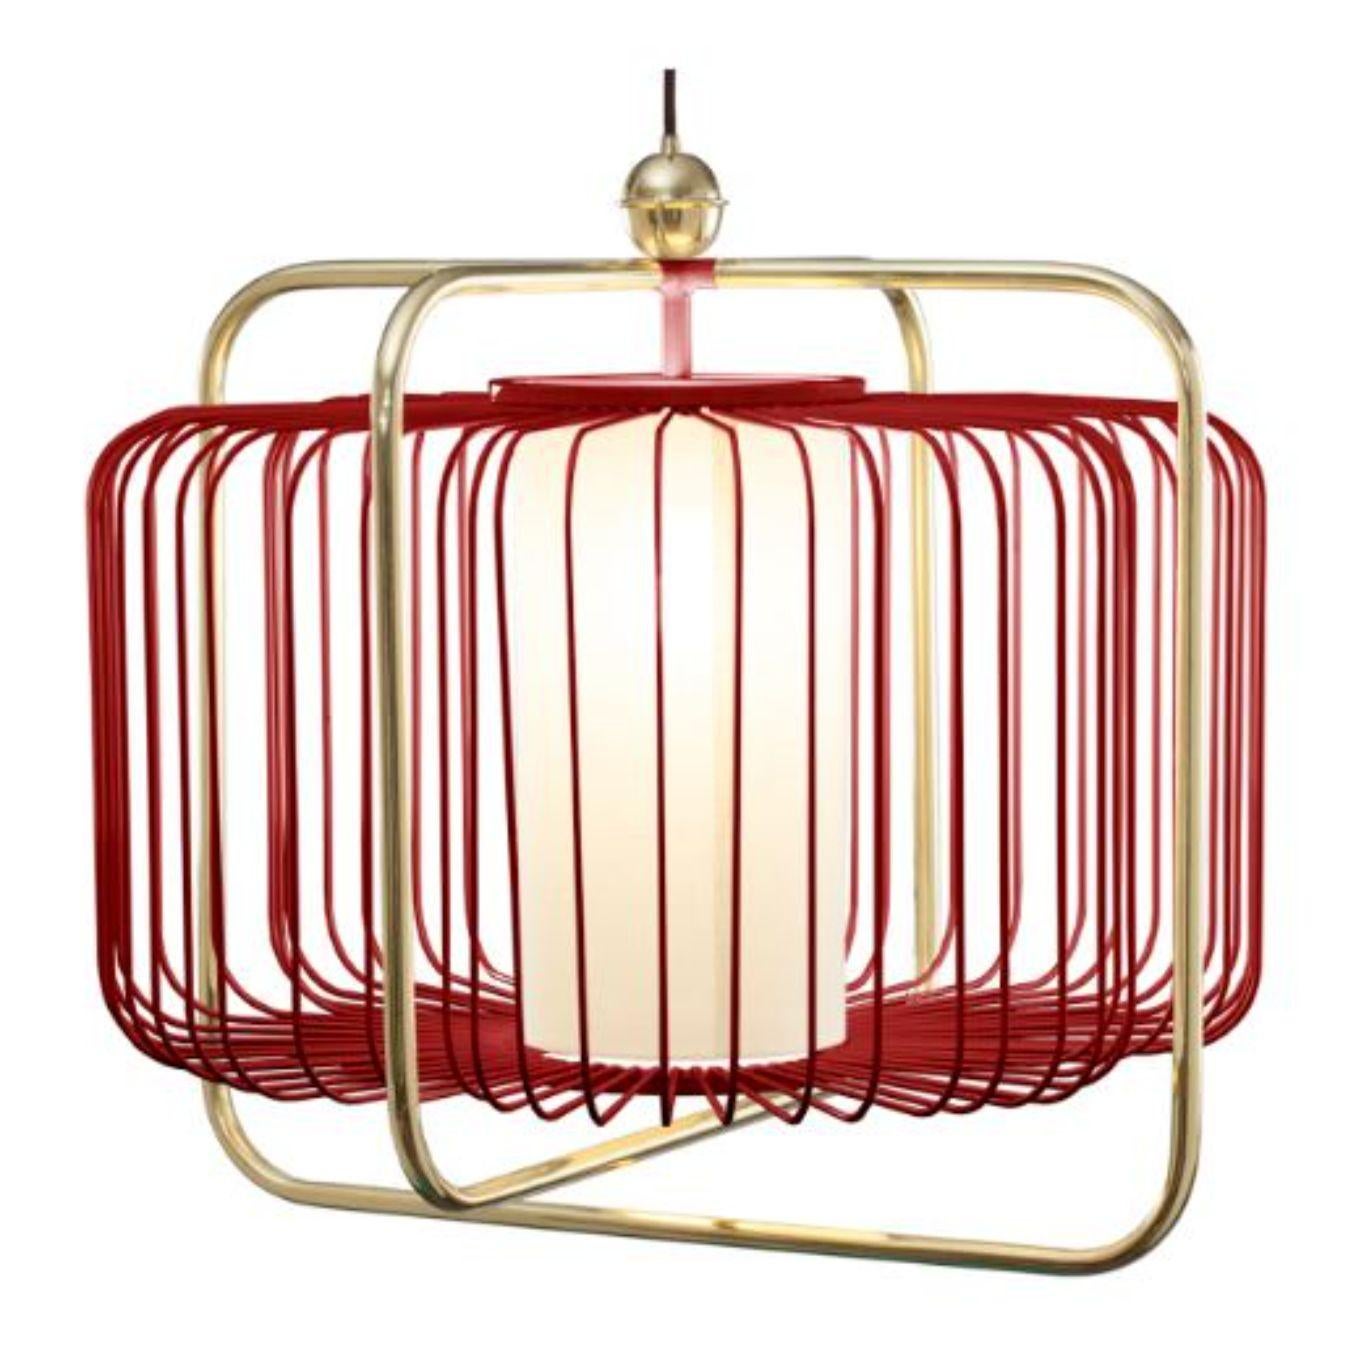 Brass and lipstick Jules I suspension lamp by Dooq
Dimensions: W 63 x D 63 x H 57 cm
Materials: lacquered metal, polished or brushed metal, brass.
abat-jour: cotton
Also available in different colours and